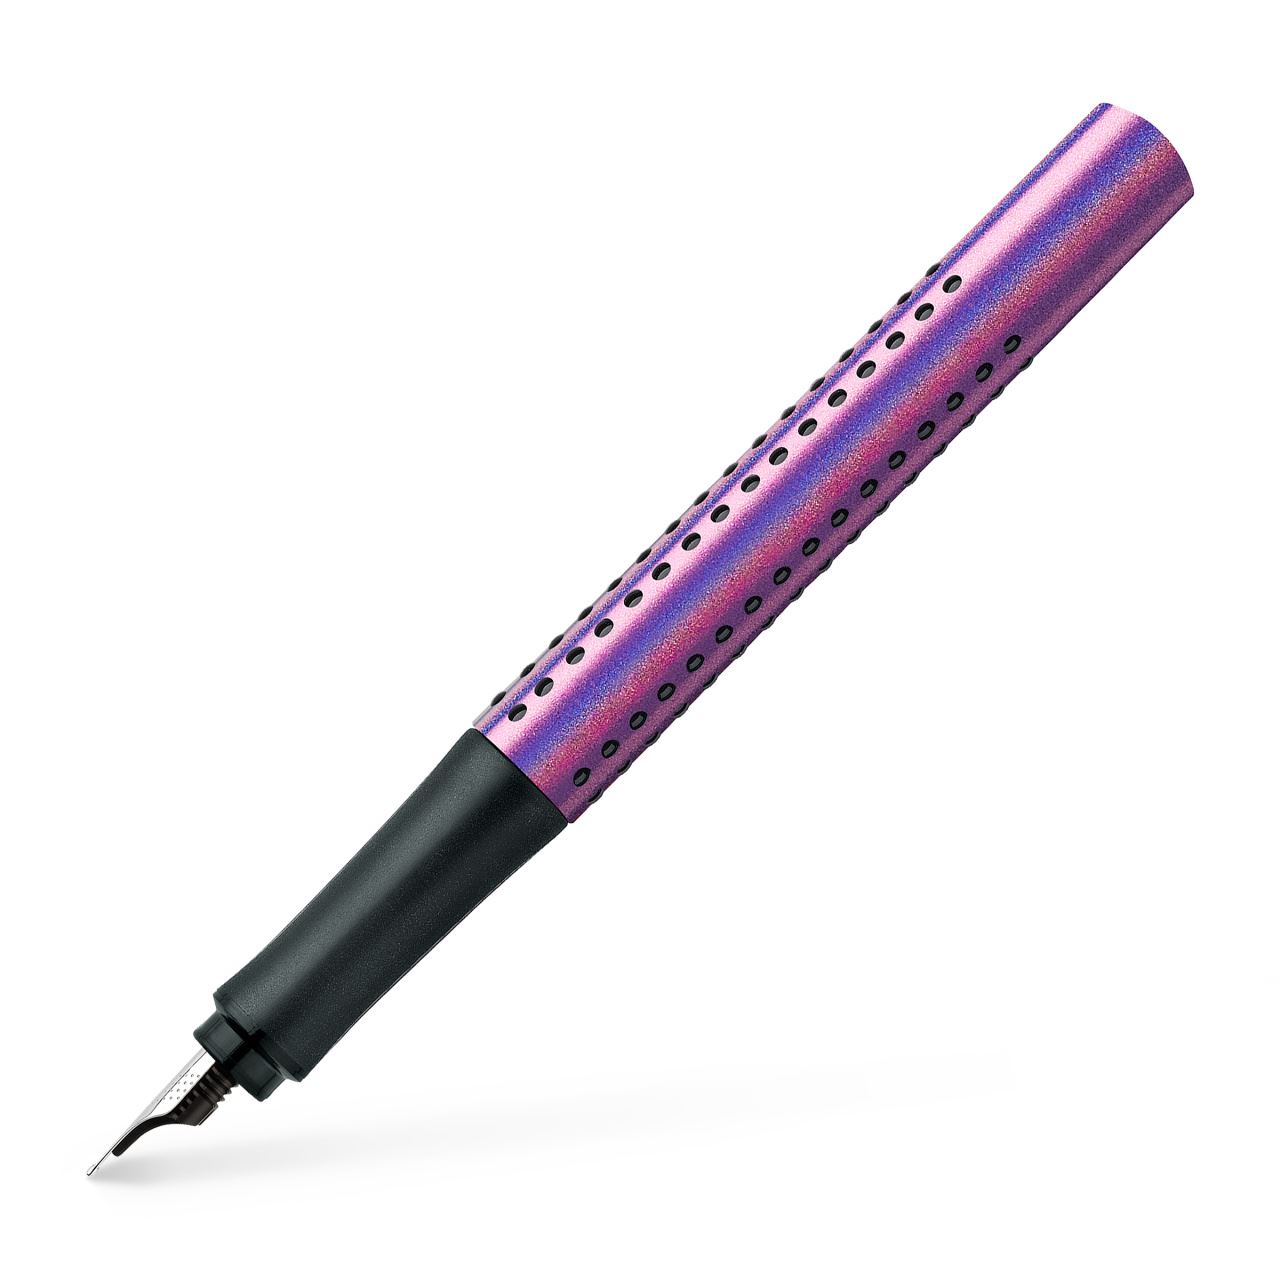 Faber-Castell - Fountain pen Grip Edition Glam M violet